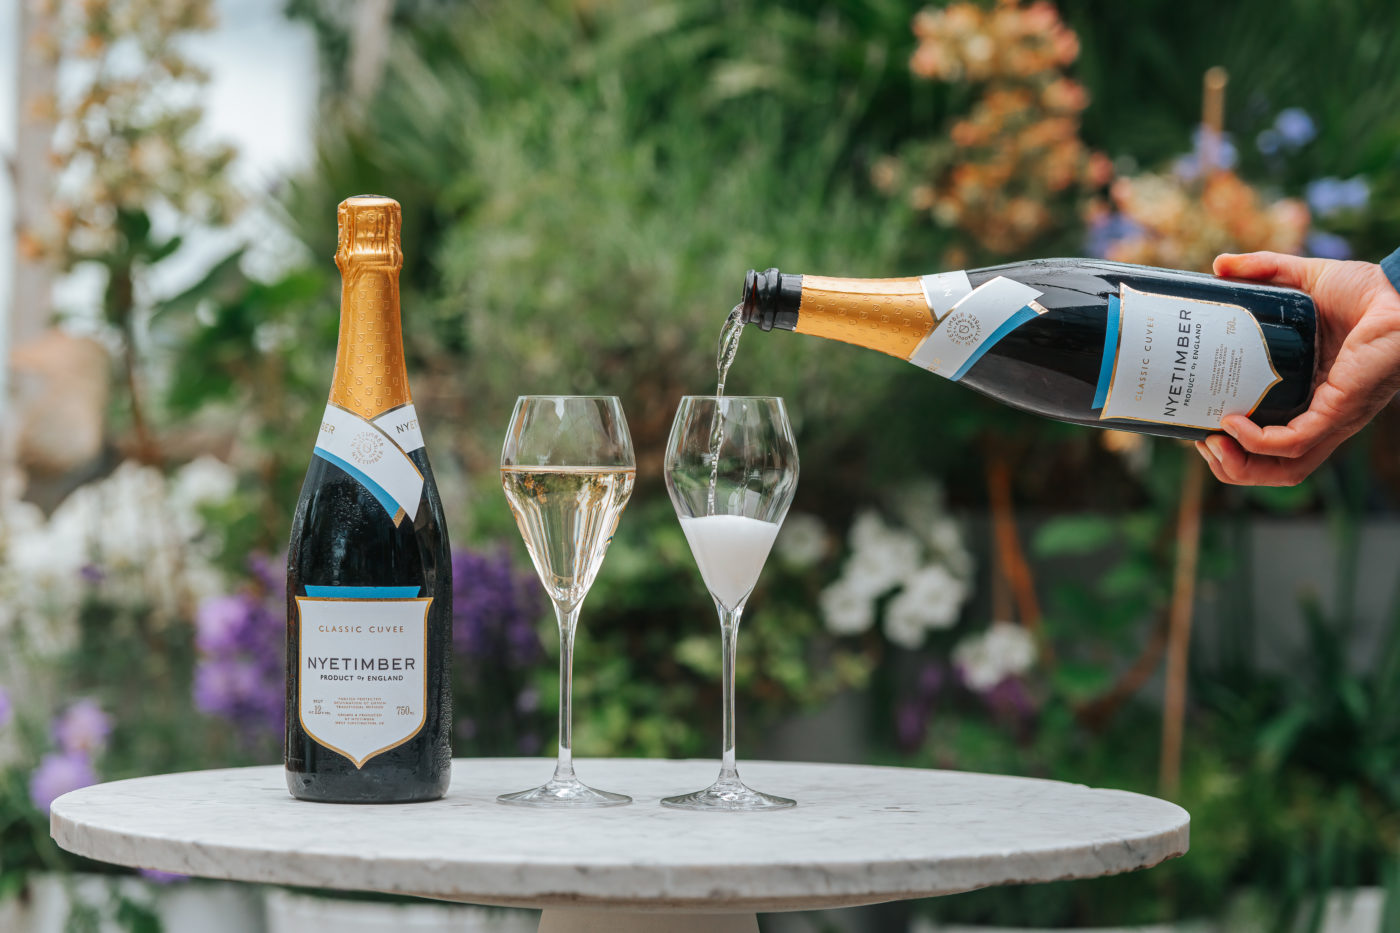 End of Summer dinner in partnership with Nyetimber